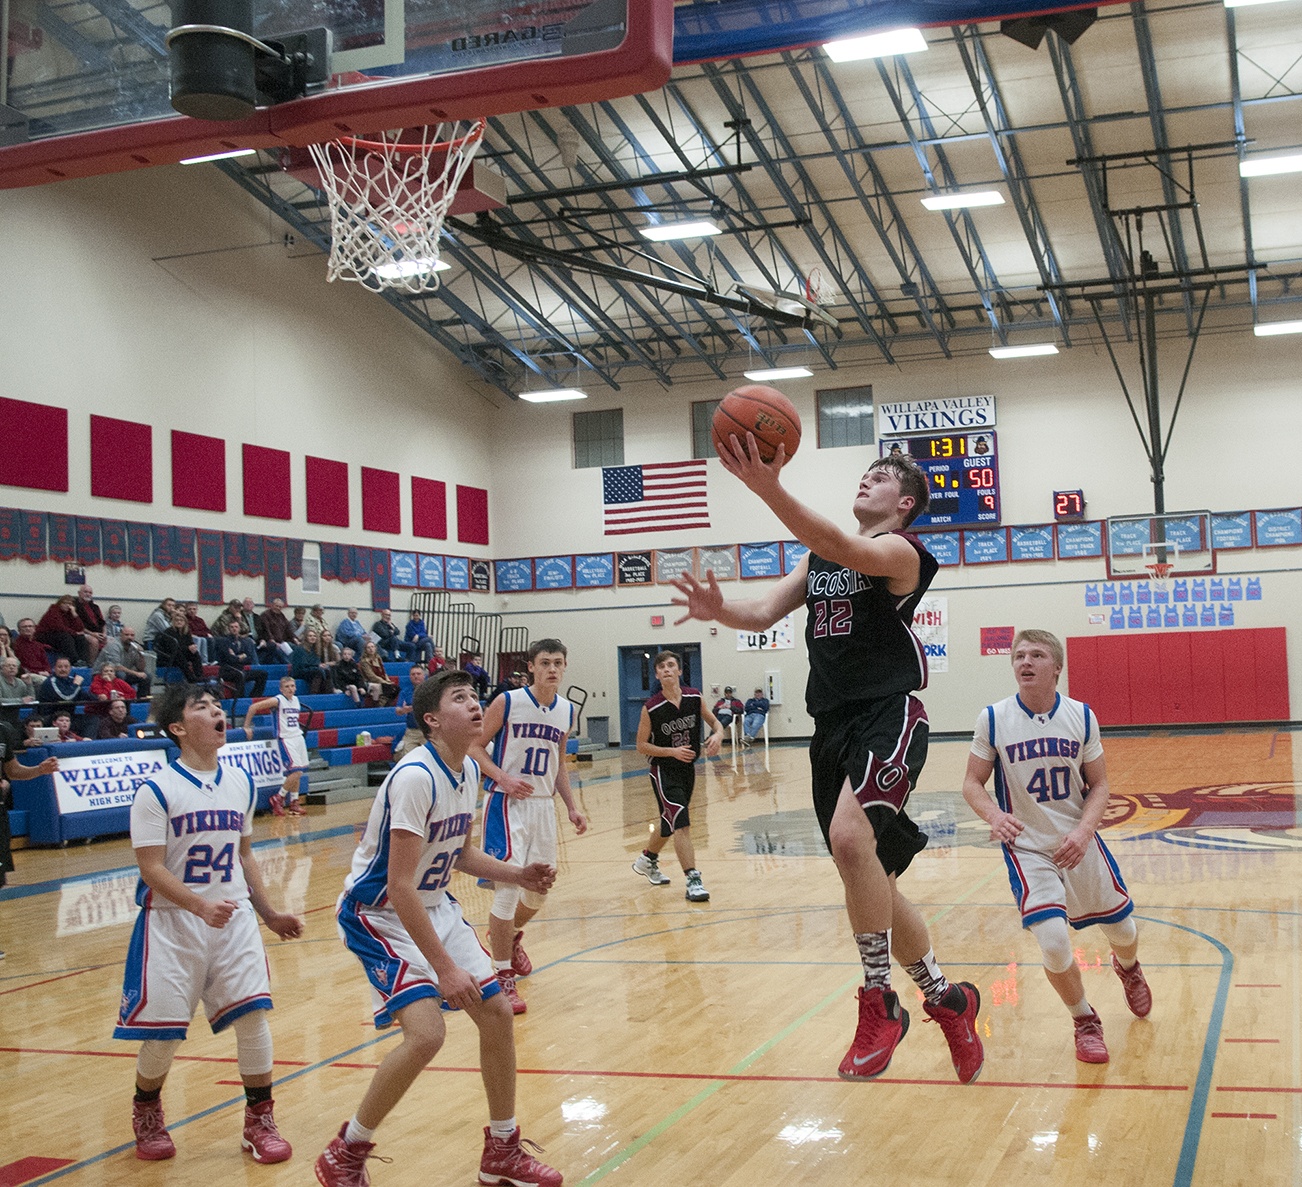 (Brendan Carl | The Daily World) Ocosta’s Paul Bjornsgard soars in for the game-winning lay up against Willapa Valley in a Pacific 2B League game at Tenoski Gym on Monday.